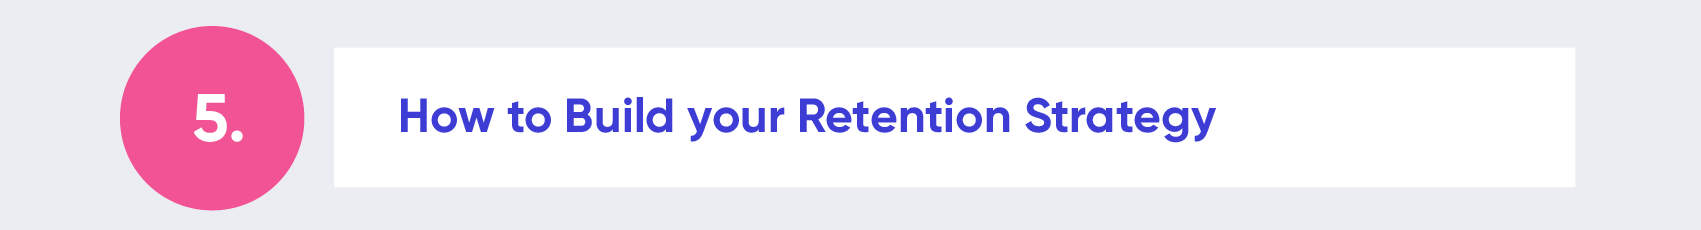 How to Build a Retention Strategy